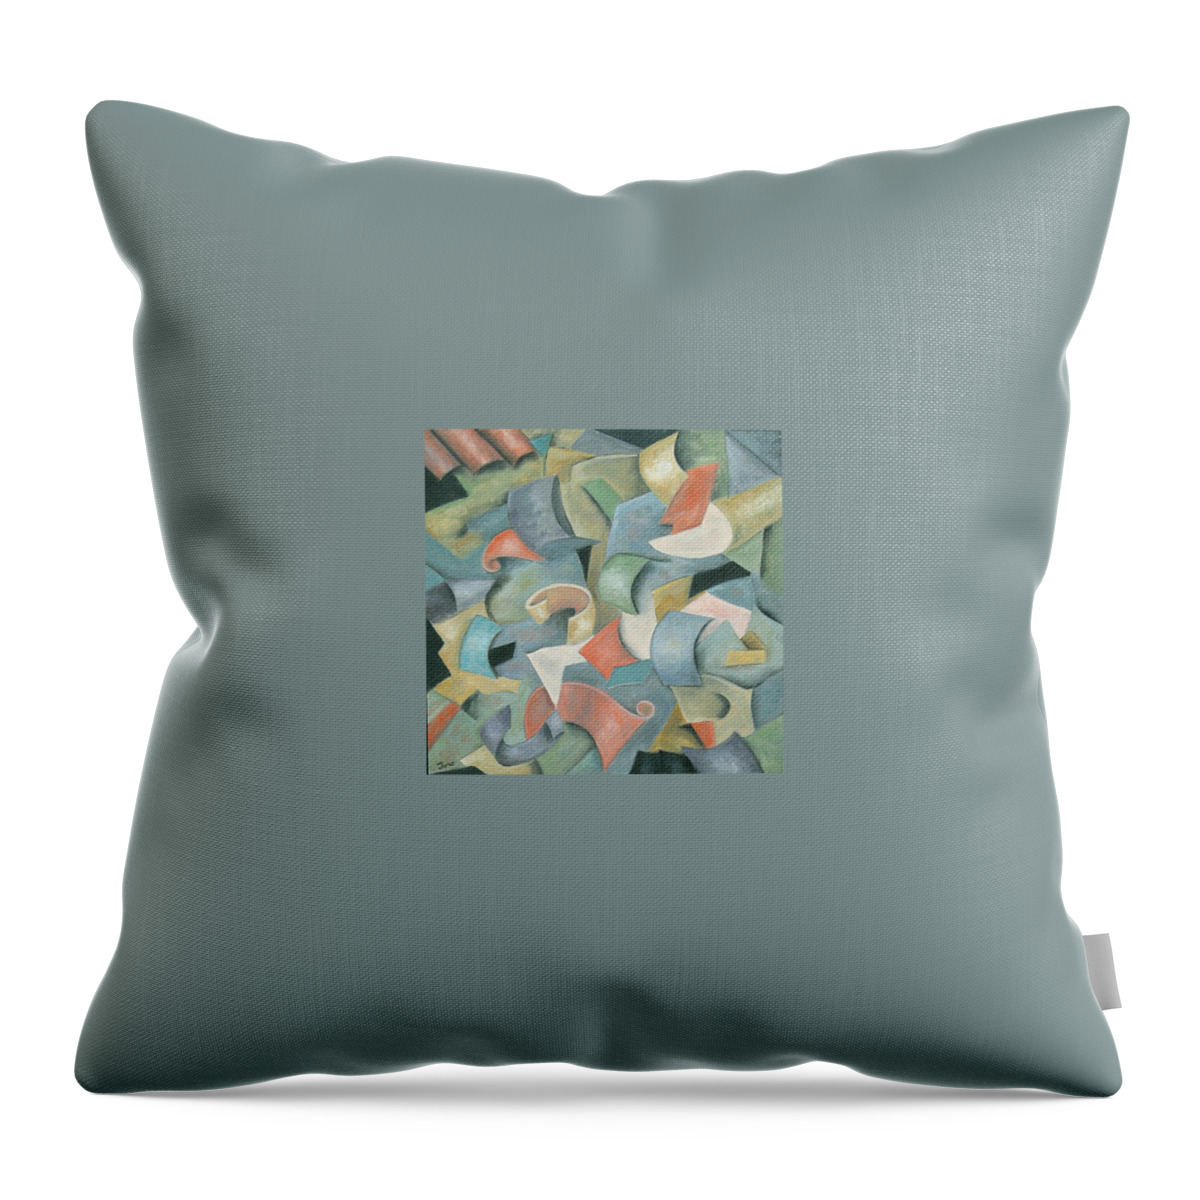 Contemporary Throw Pillow featuring the painting Jubilation by Trish Toro